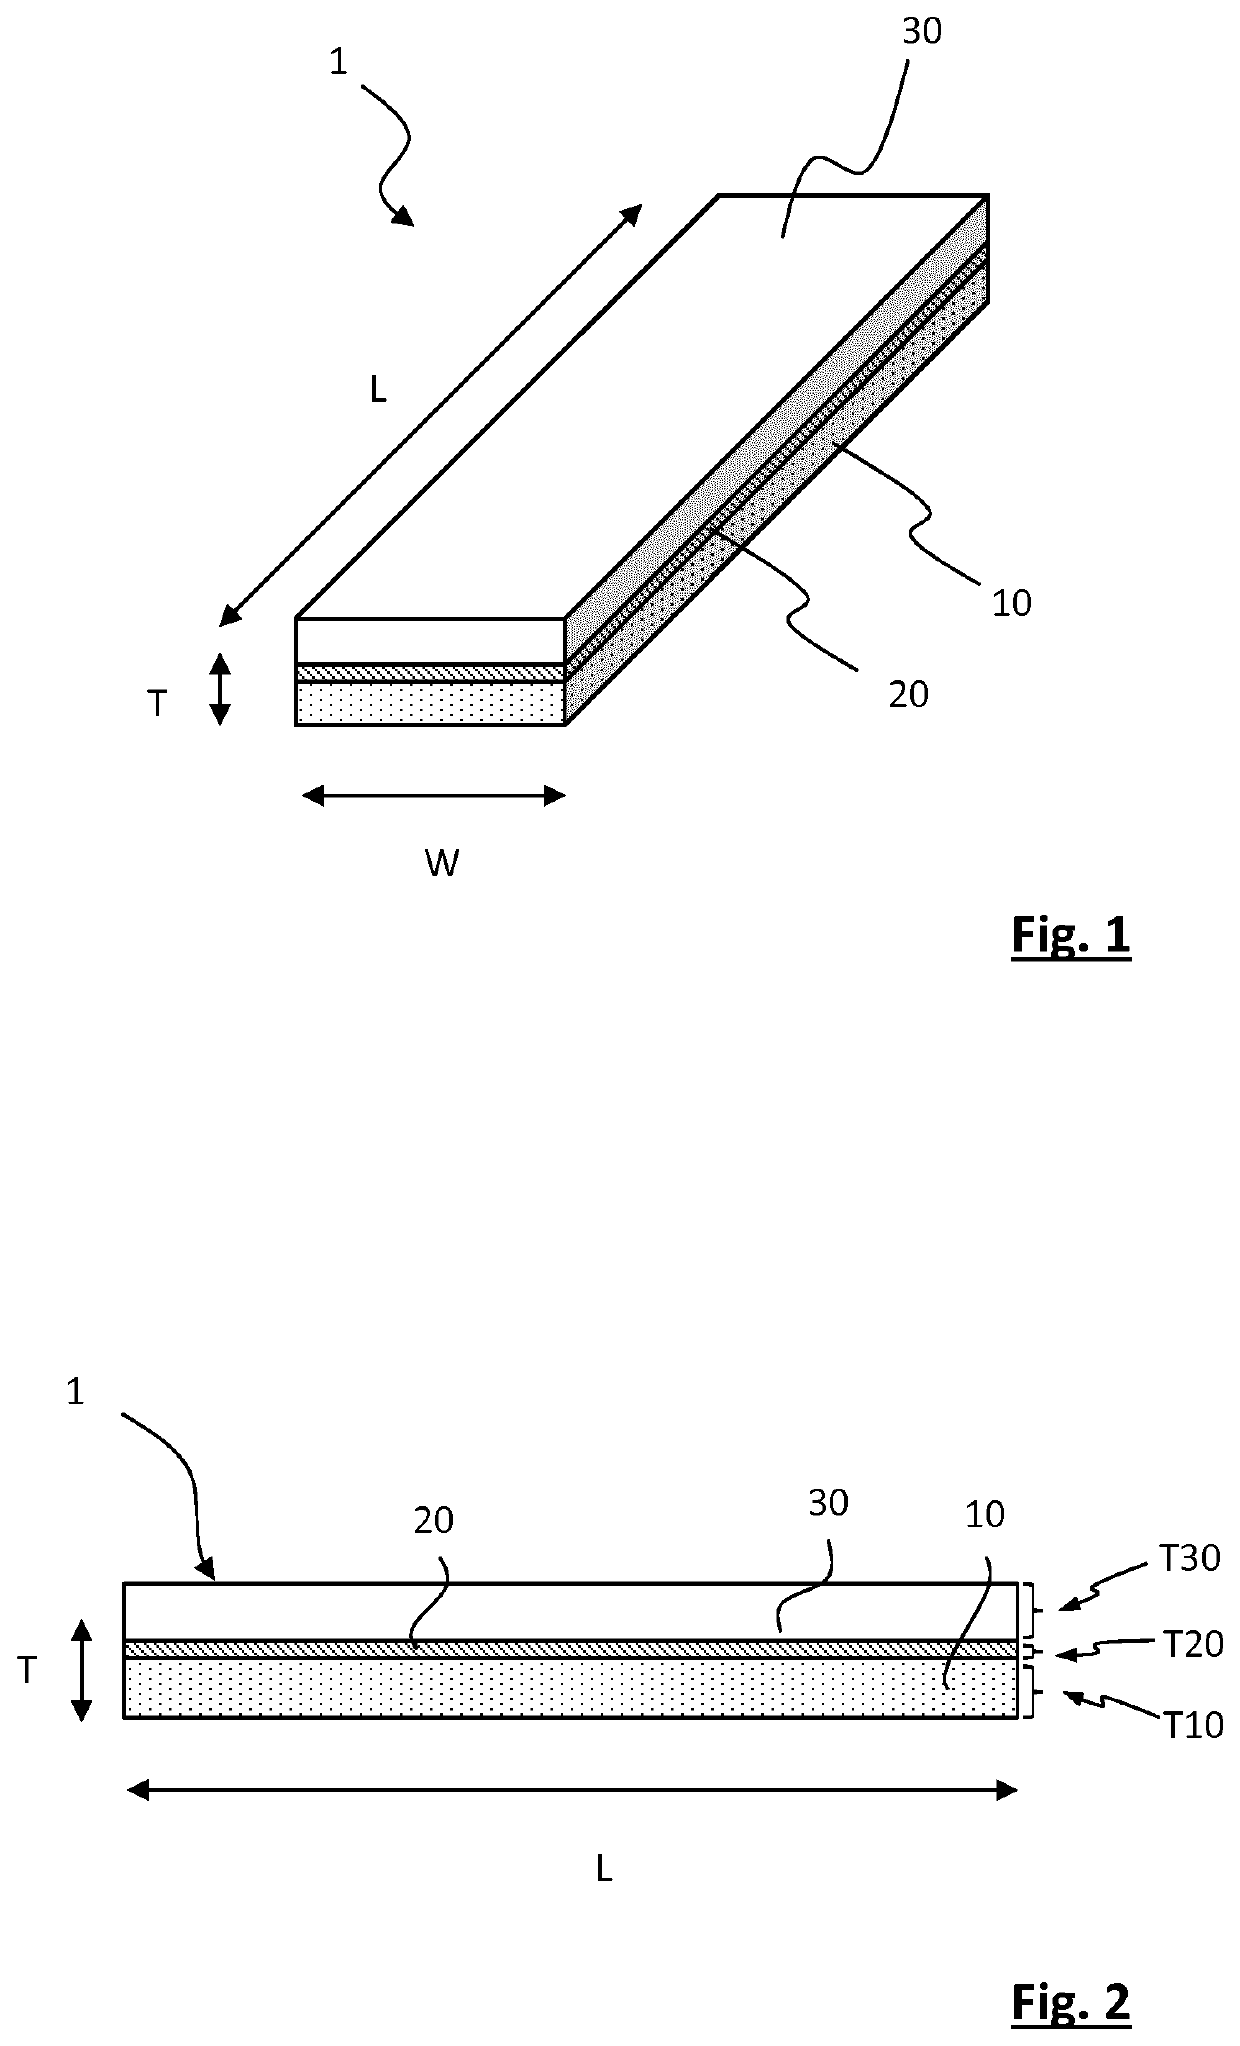 Multi-layer susceptor assembly for inductively heating an aerosol-forming substrate